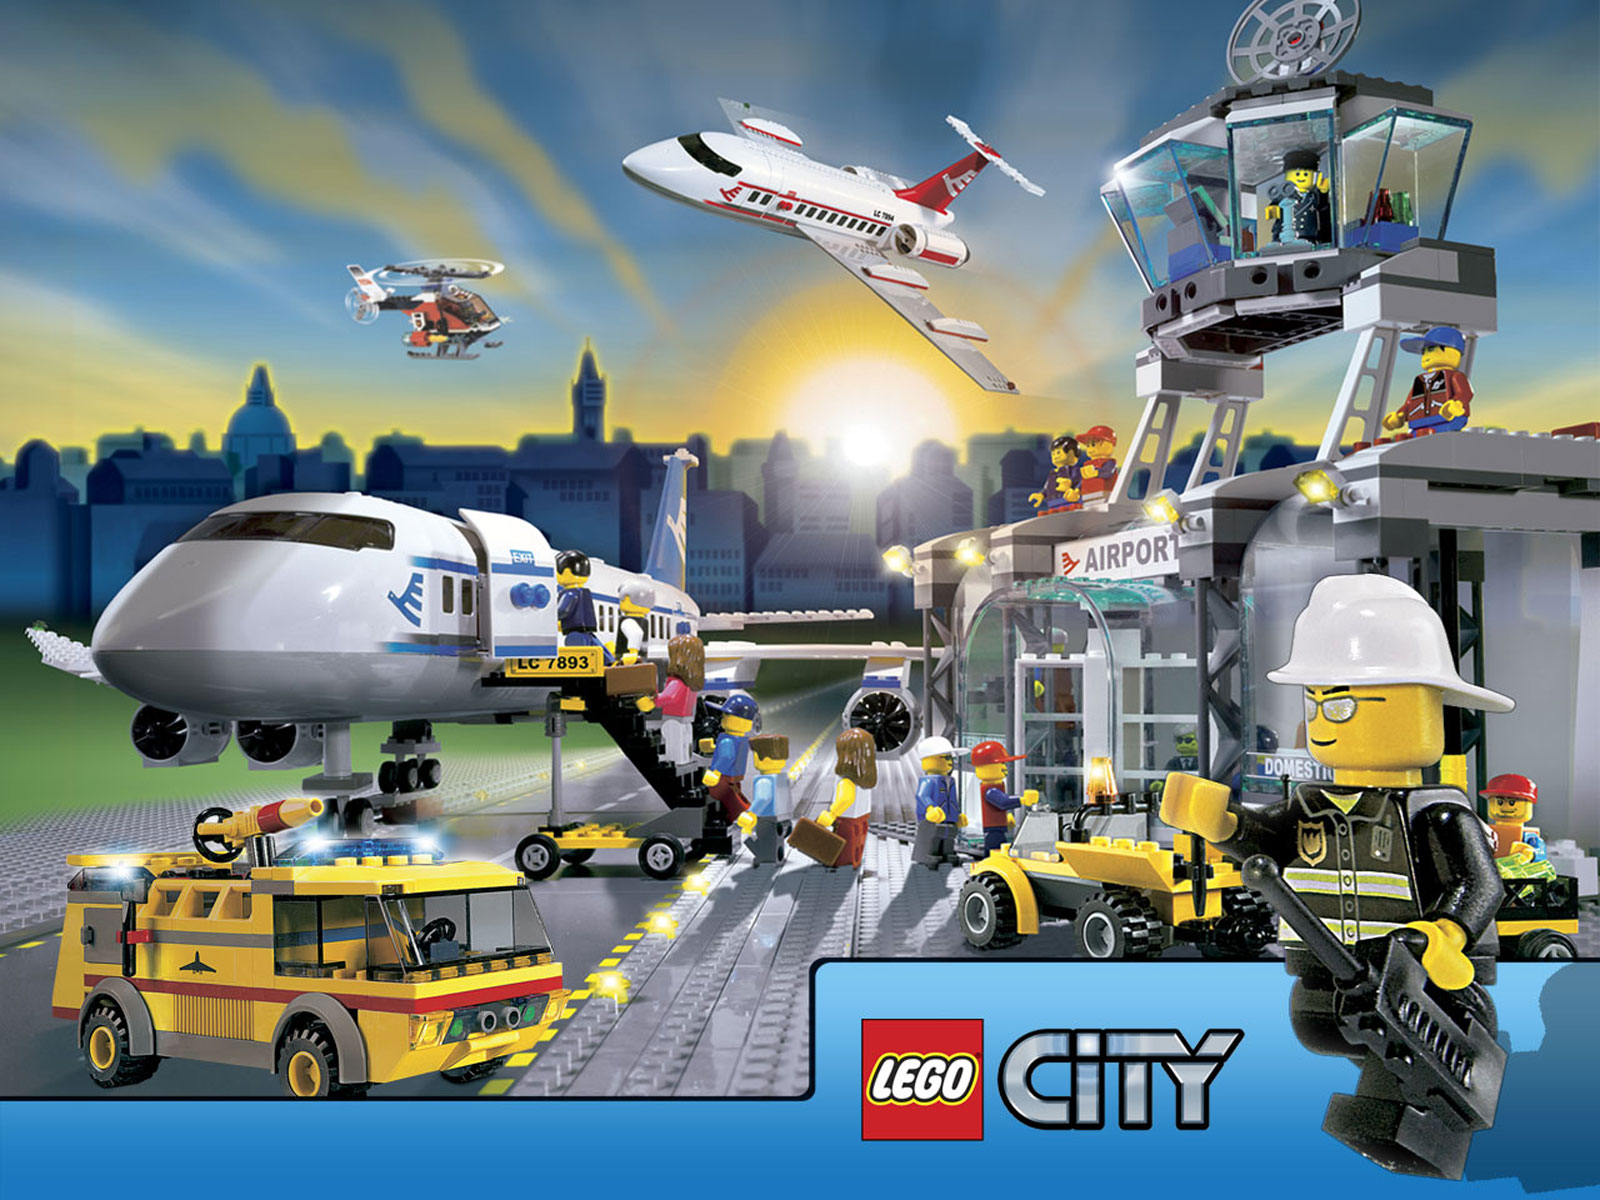 Lego City Desktop Wallpapers for HD Widescreen and Mobile 1600x1200